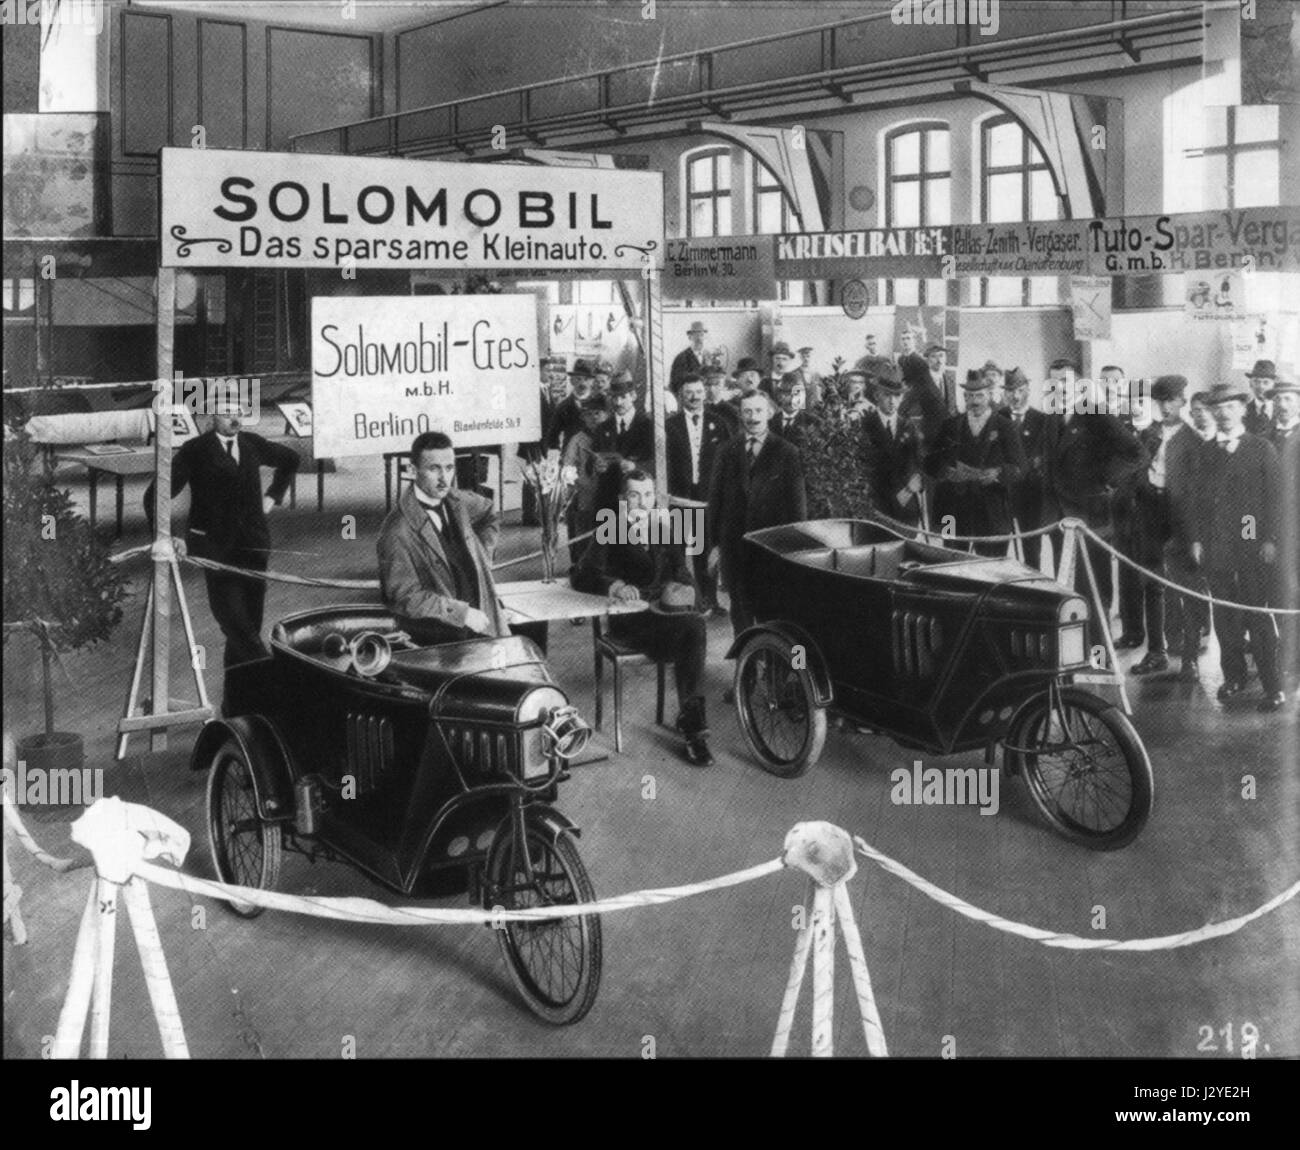 L'AHW Messestand Solomobil Herbstmesse Leipzig GmbH 1919 Banque D'Images